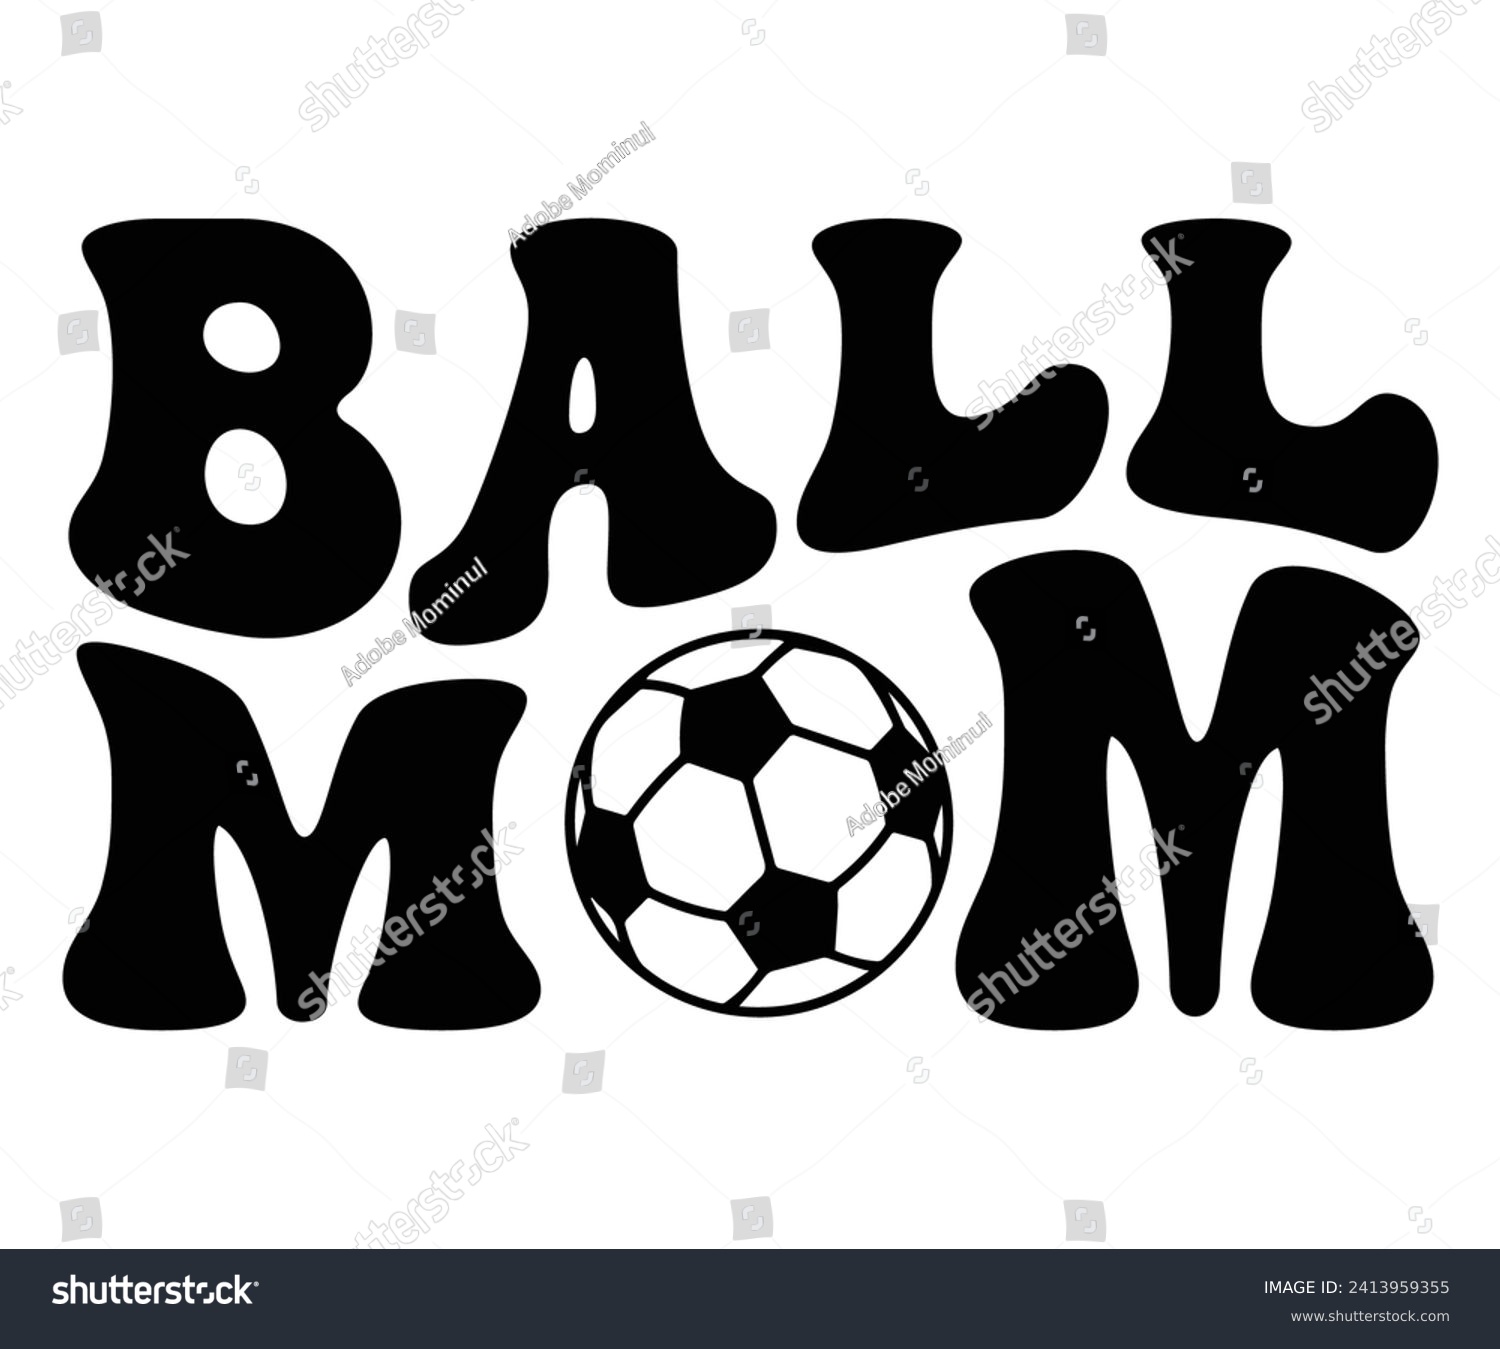 SVG of Ball Mom Retro,Soccer Svg,Soccer Quote Svg,Retro,Soccer Mom Shirt,Funny Shirt,Soccar Player Shirt,Game Day Shirt,Gift For Soccer,Dad of Soccer,Soccer Mascot,Soccer Football,Sport Design Svg,Cut File, svg